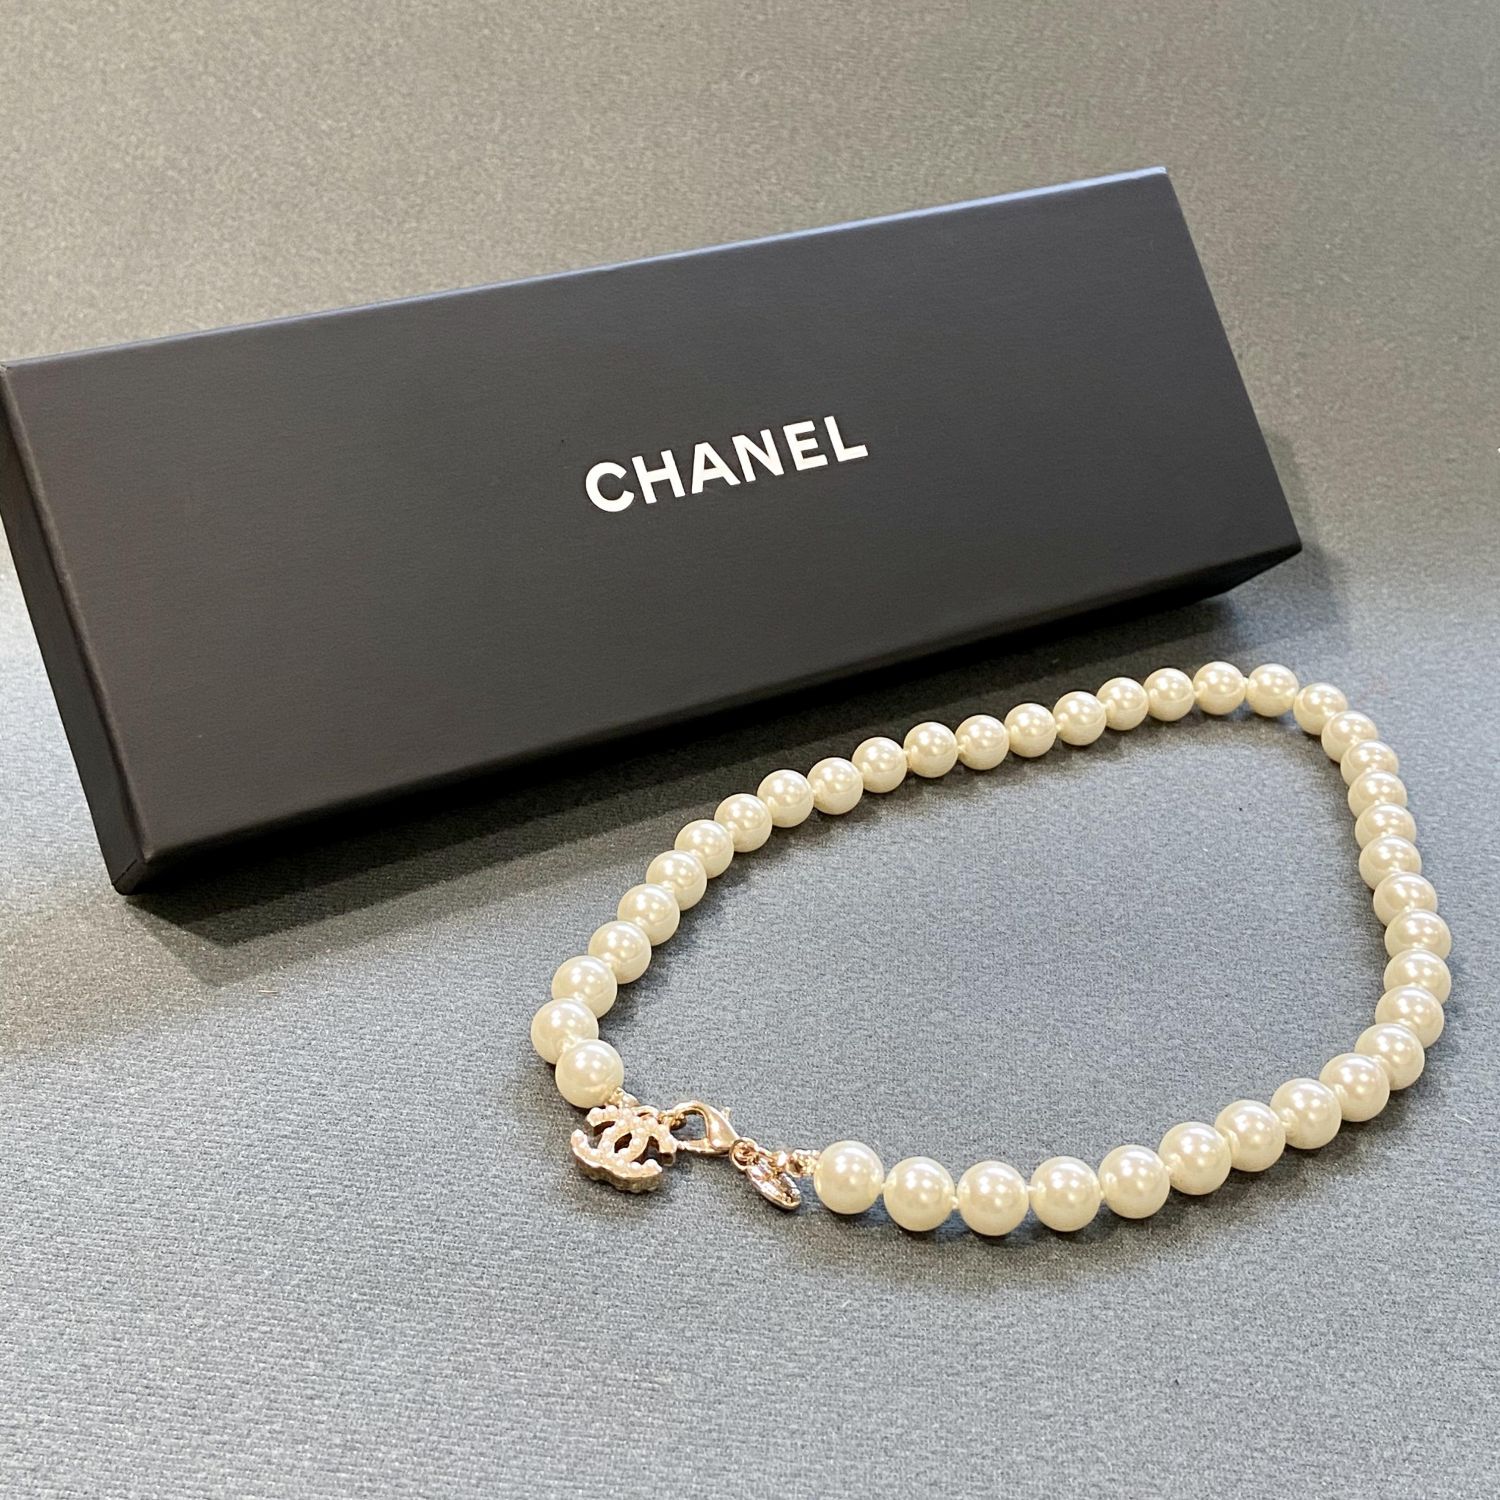 Chanel Pearl Necklace - Jewellery & Gold - Hemswell Antique Centres